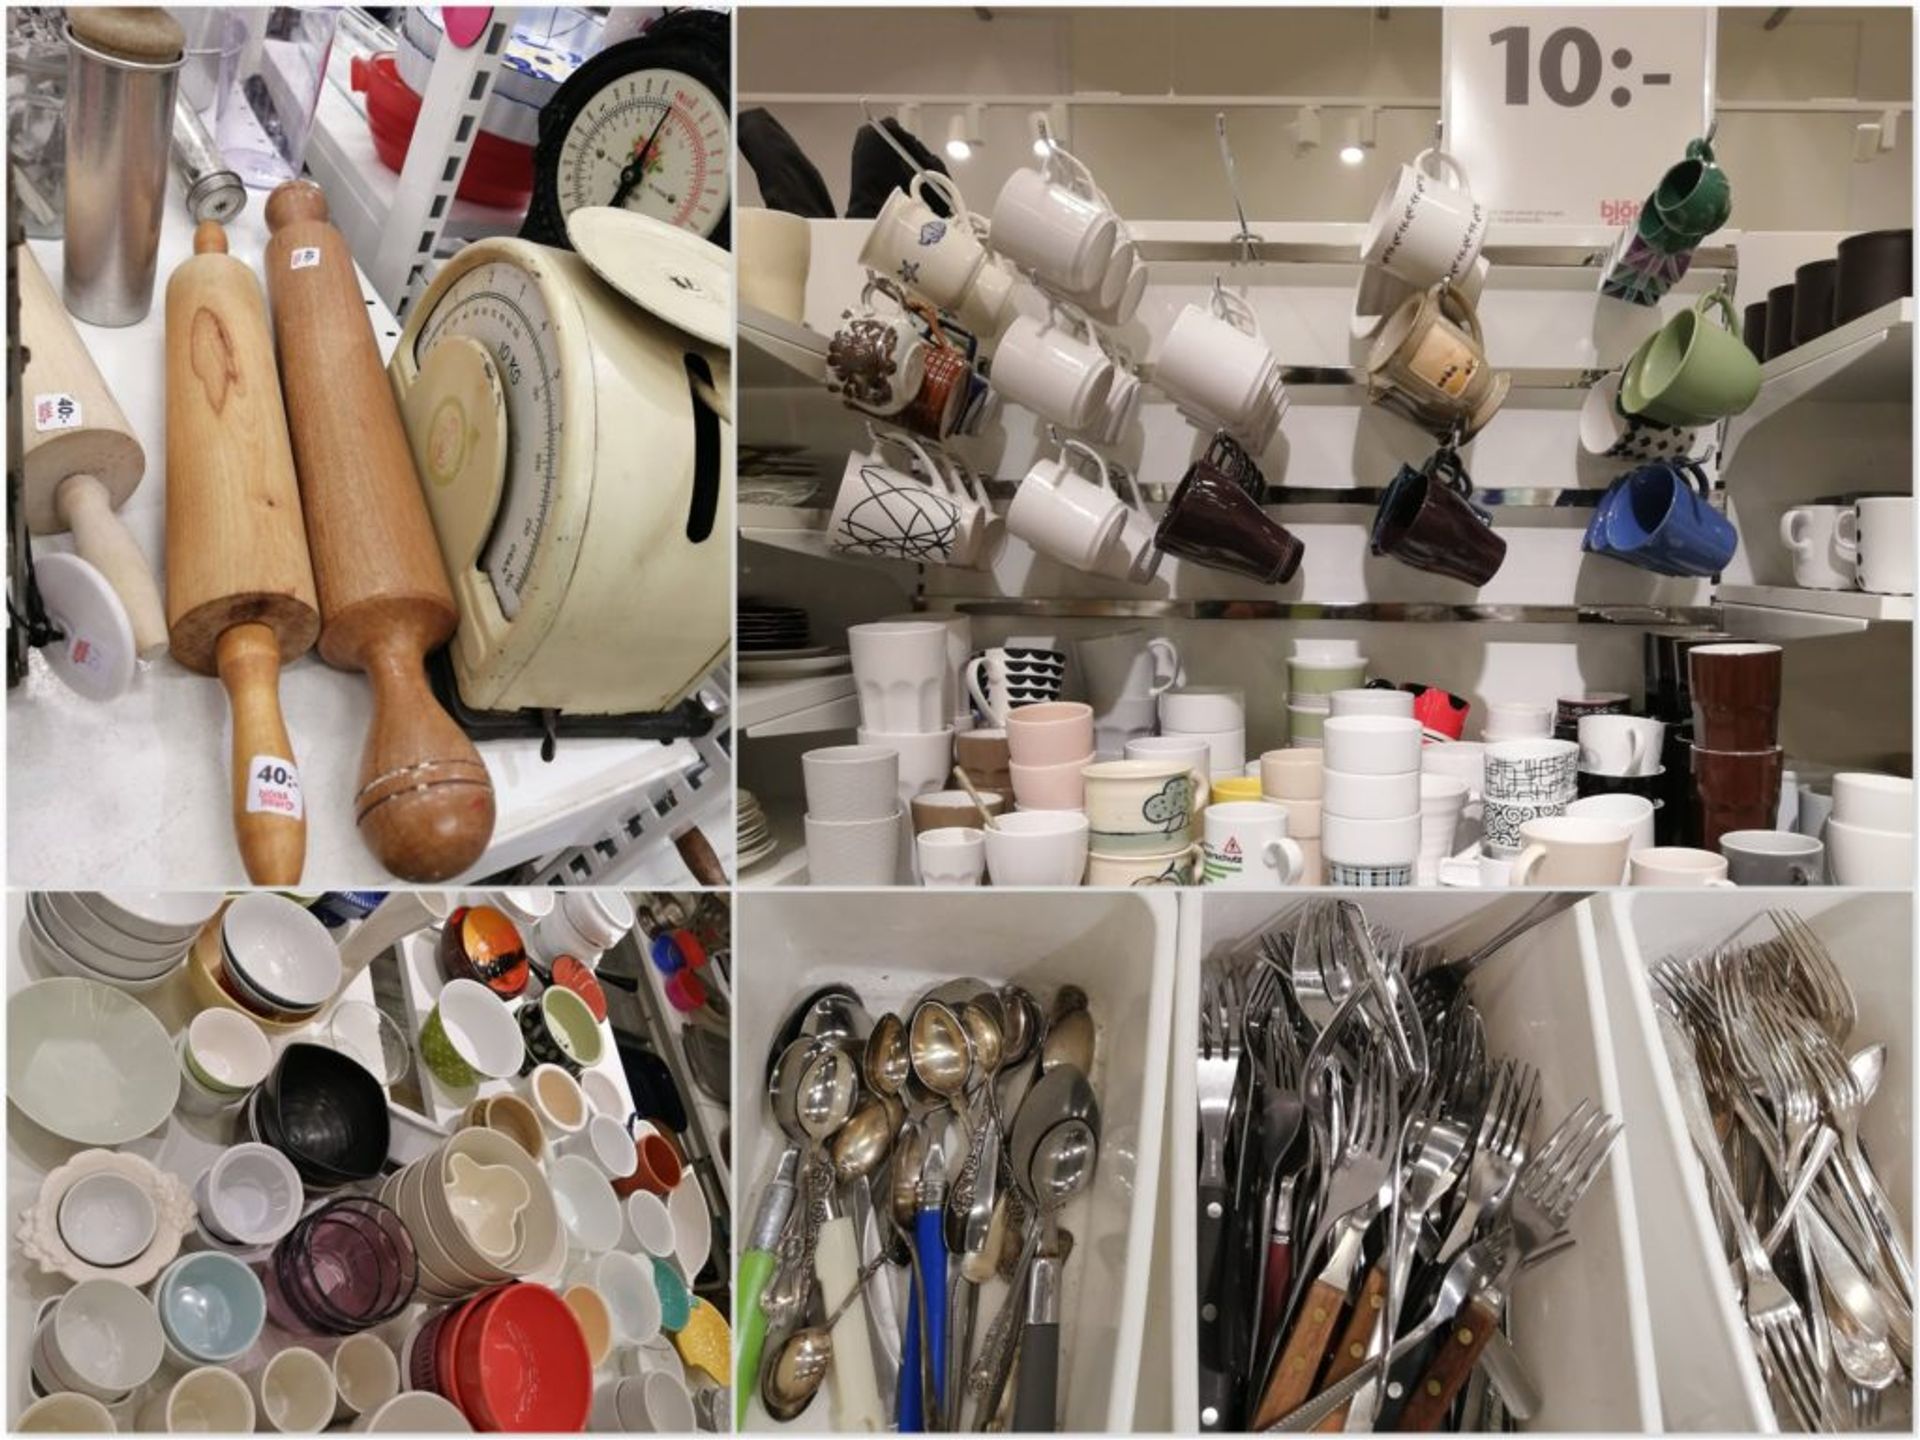 Shelves and trays of assorted kitchenware. Mugs, cups, bowls, spoons, forks and rolling pins.